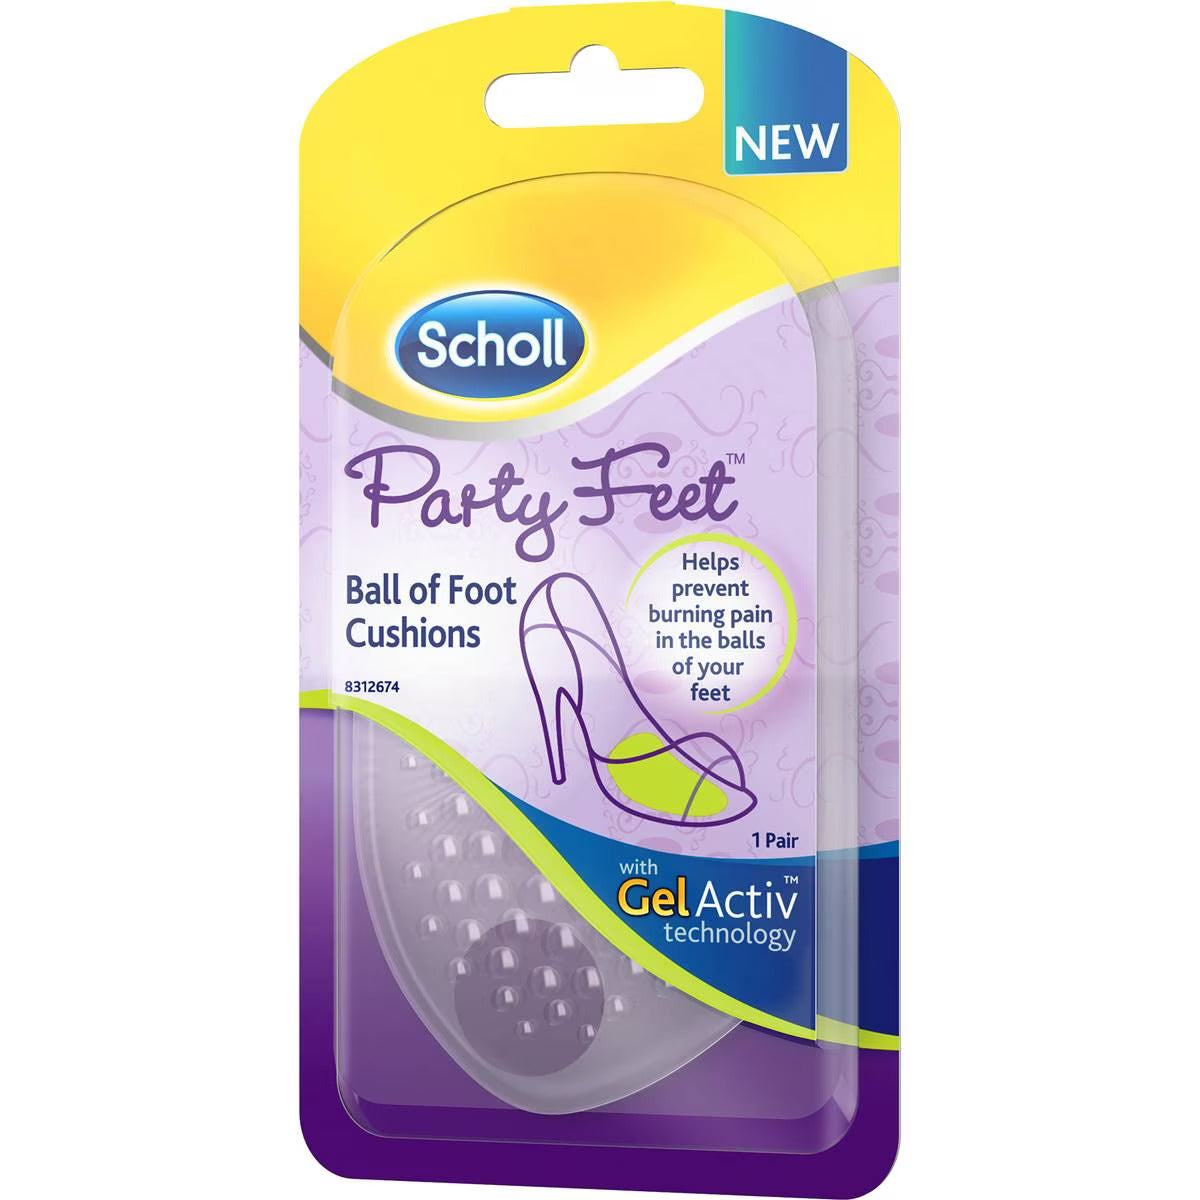 Scholl Party Feet Foot Care Gel Cushions